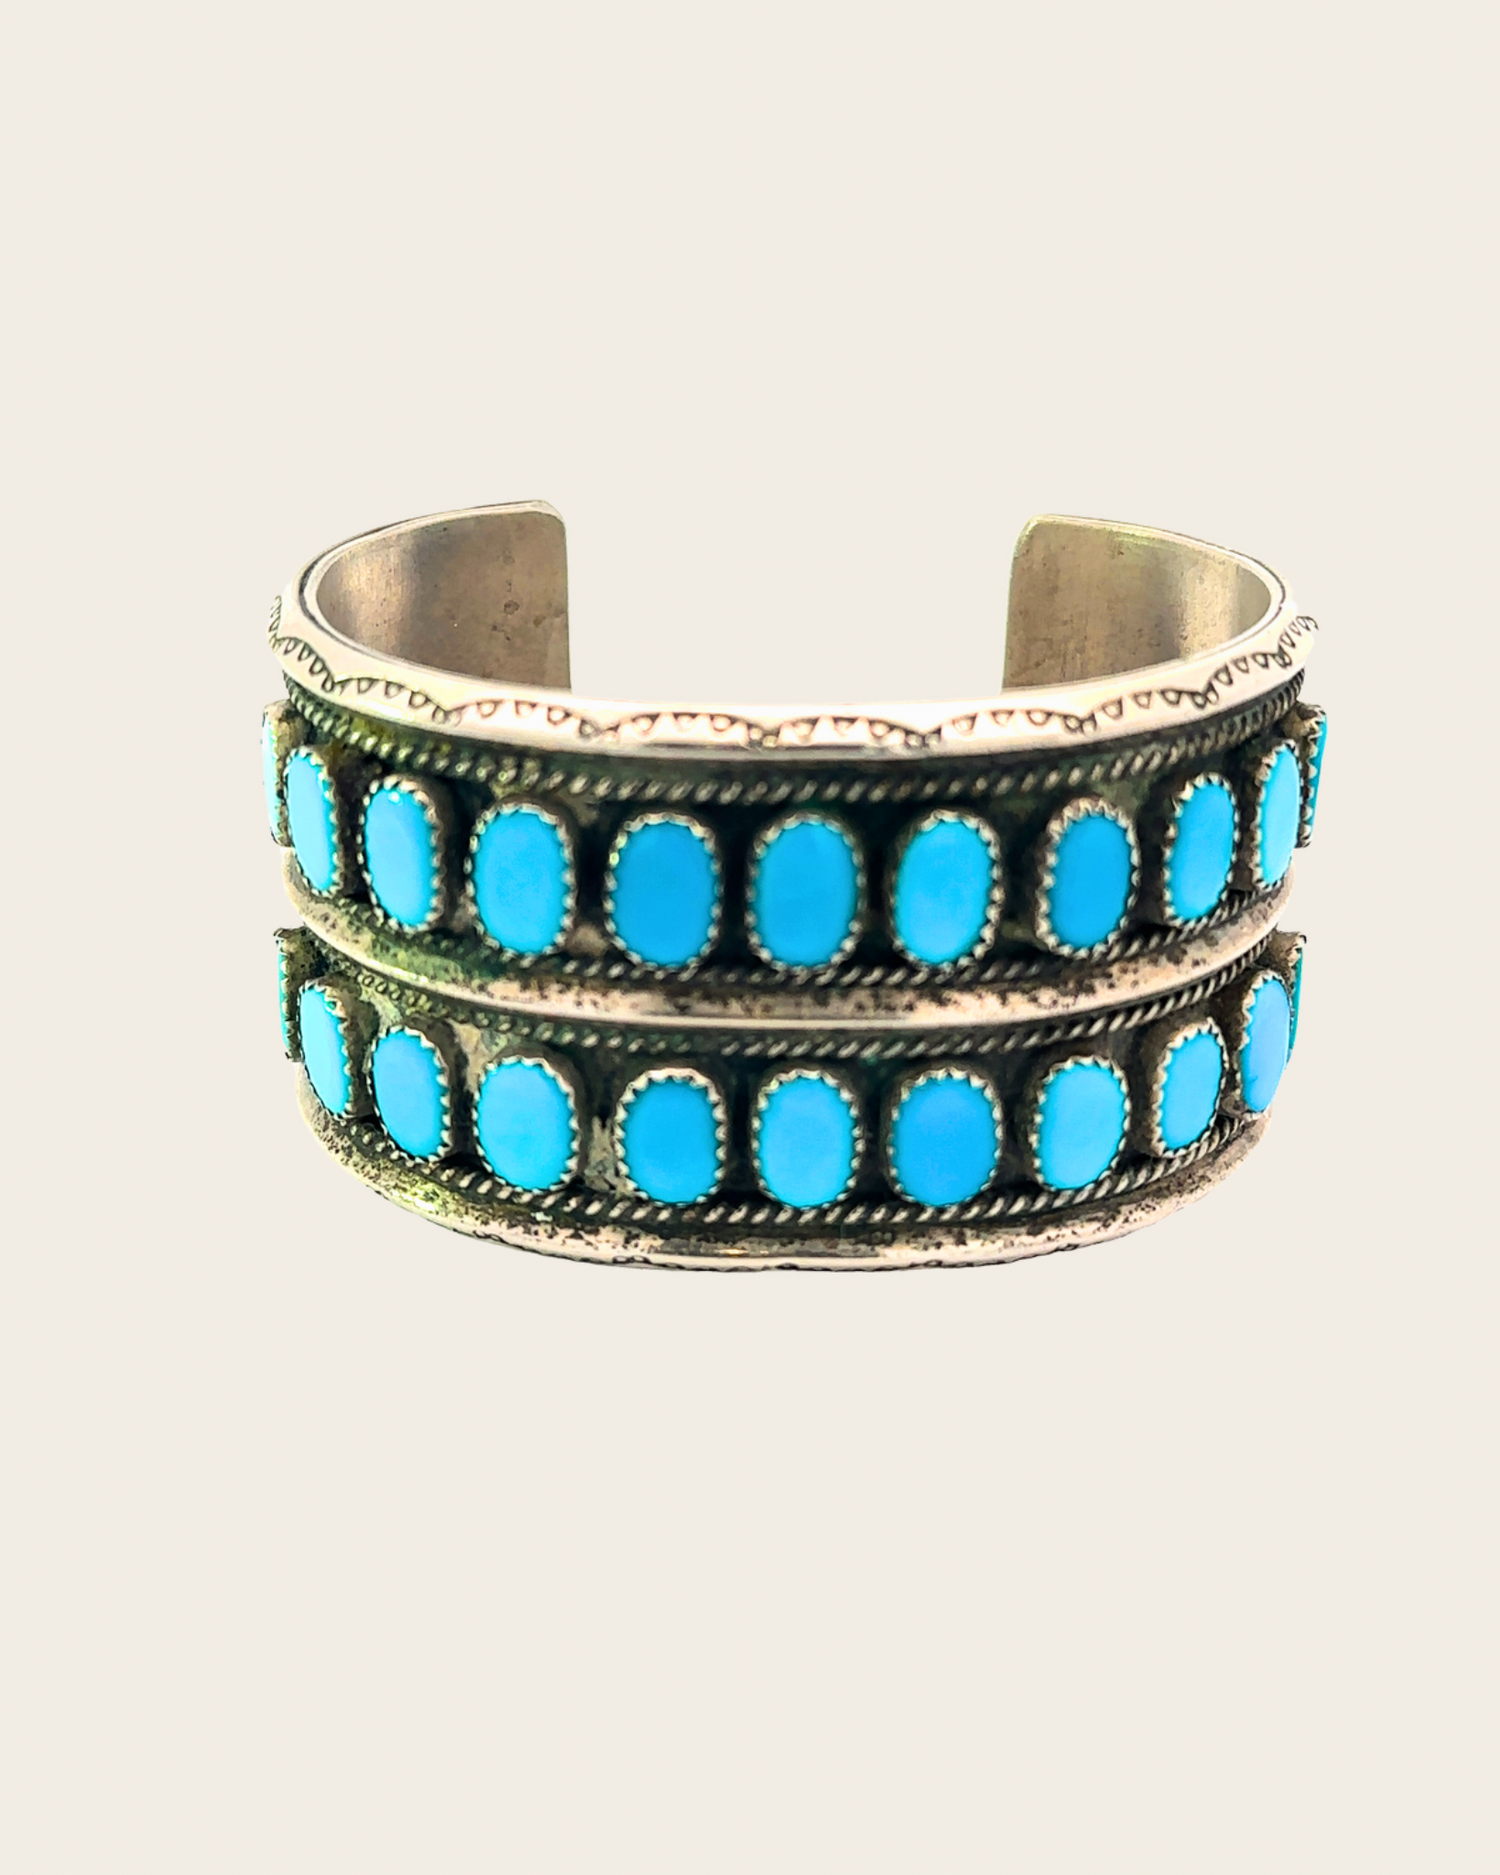 Genuine Turquoise Tie Tack, Something Blue | Jewelry by Johan